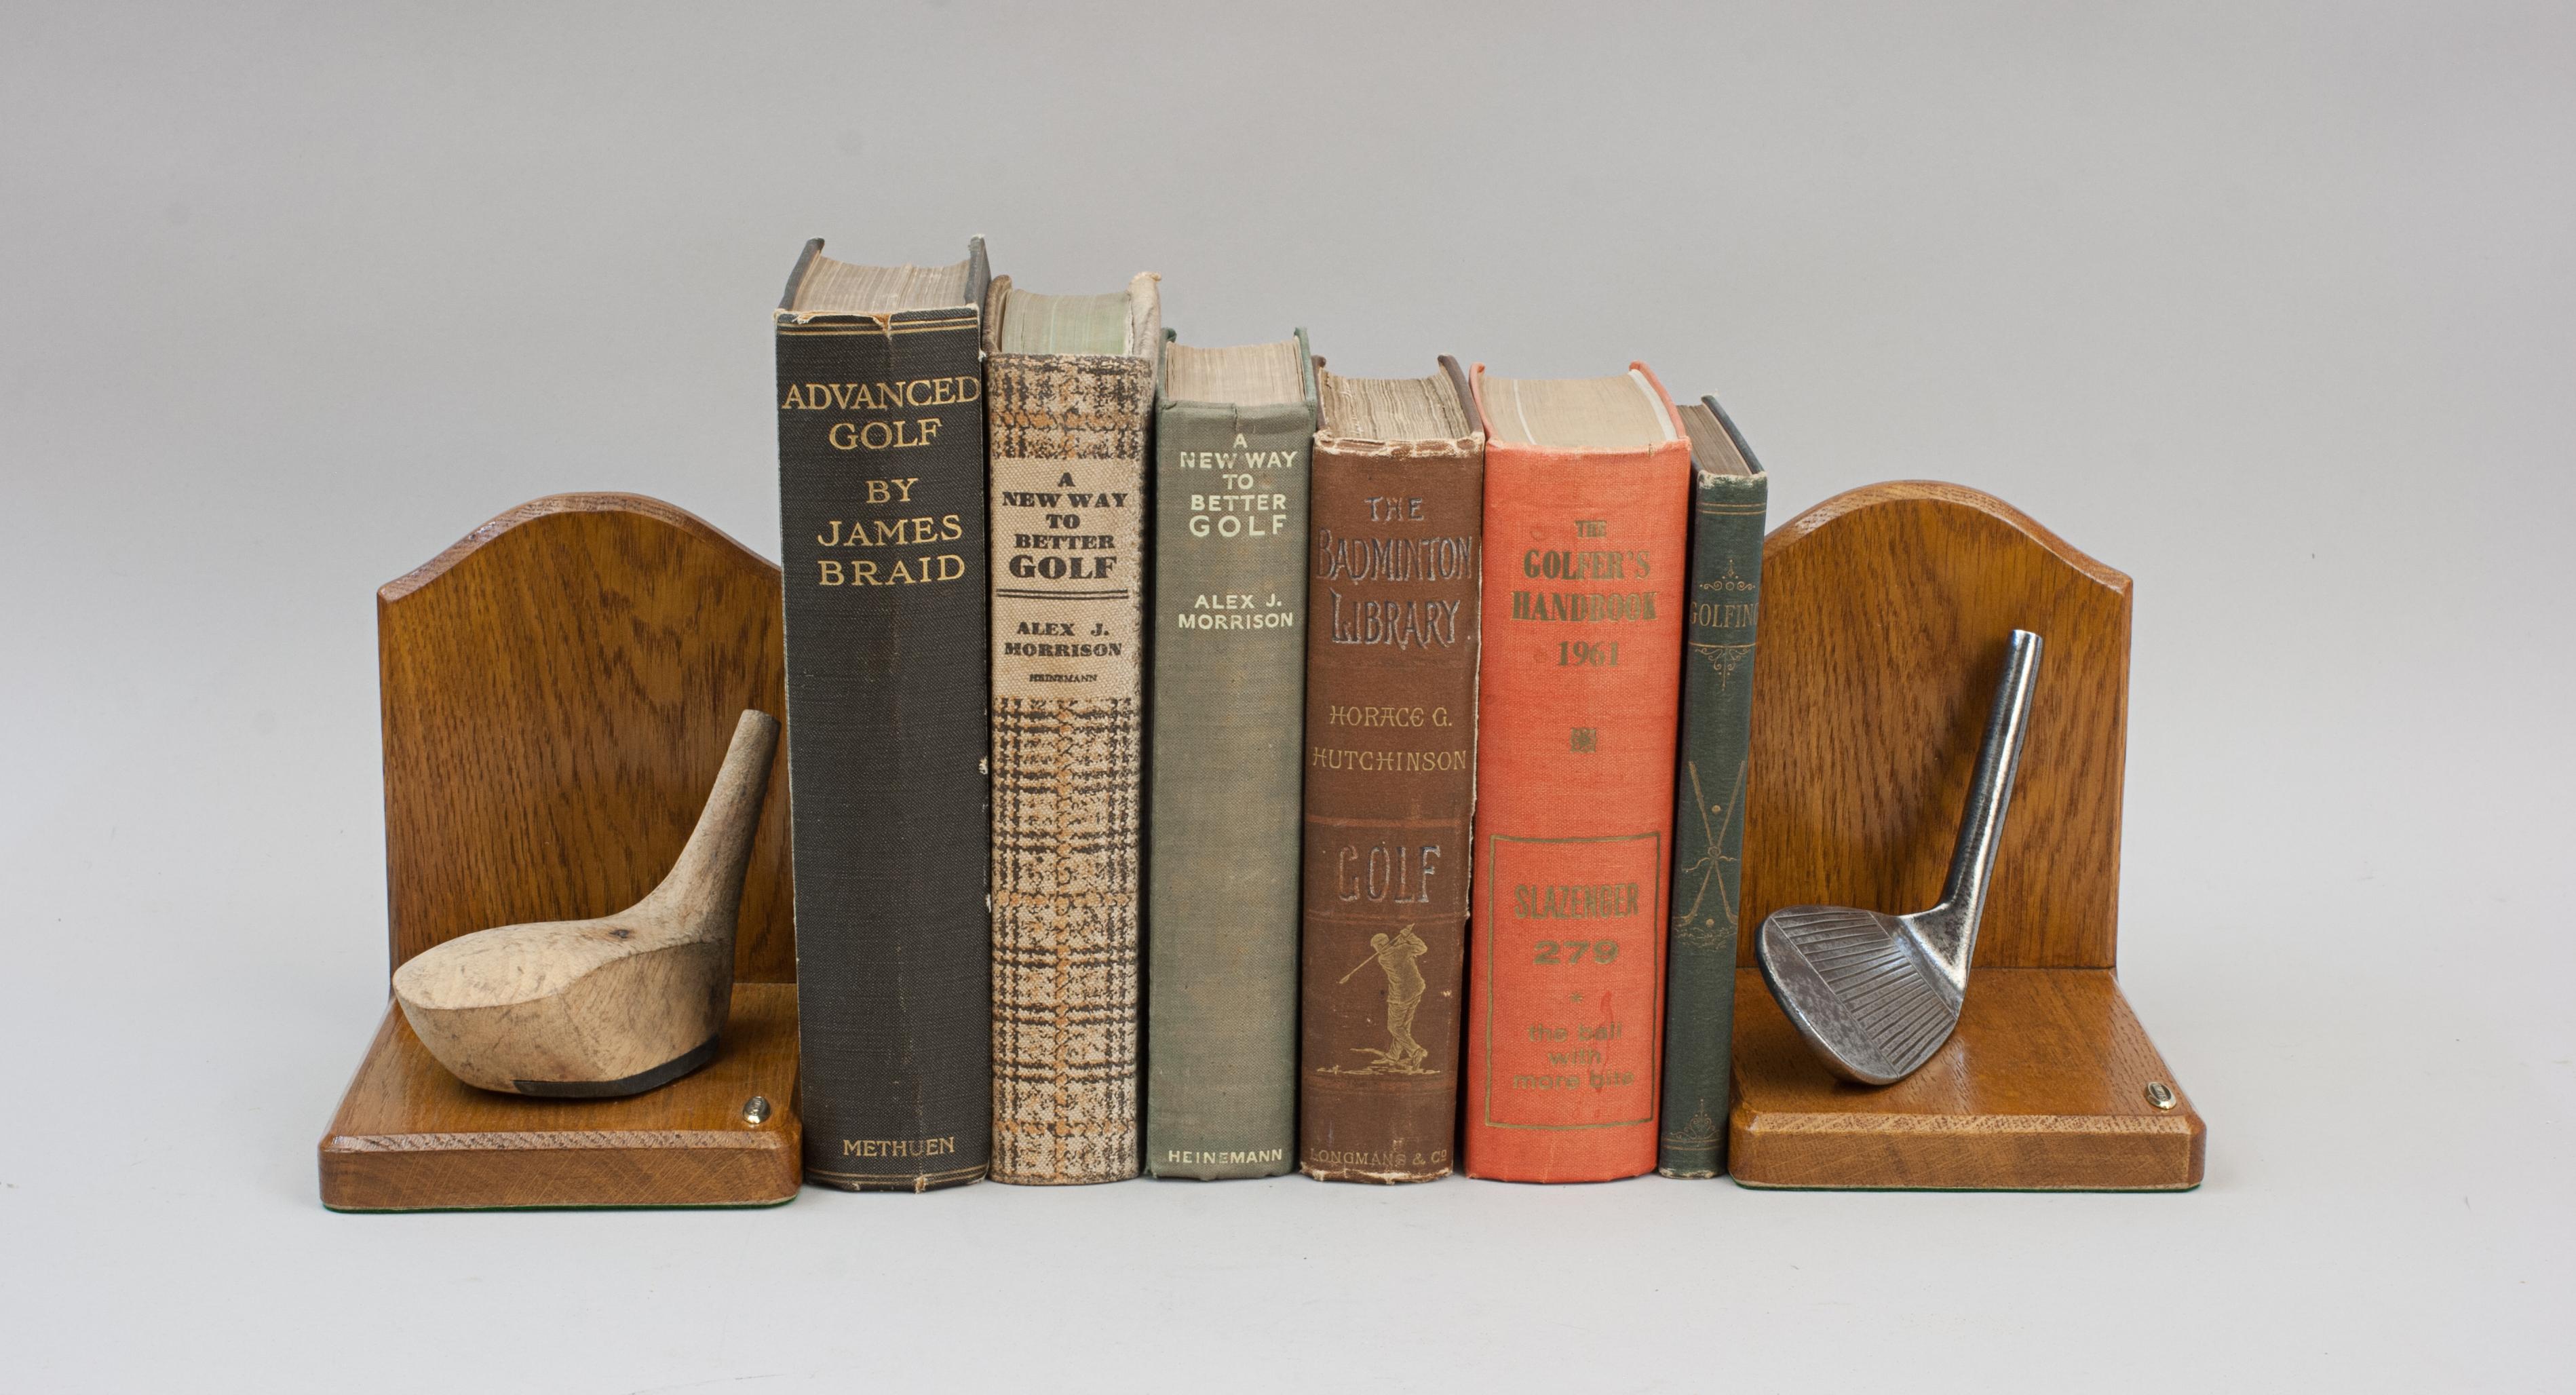 Robert Simpson Bookends, Mashie Niblick & Wood.
A pair of bookends hand crafted from high quality traditional materials with original 1940's club heads. The heads came from the Carnoustie workshop of Robert Simpson when it closed down and have been